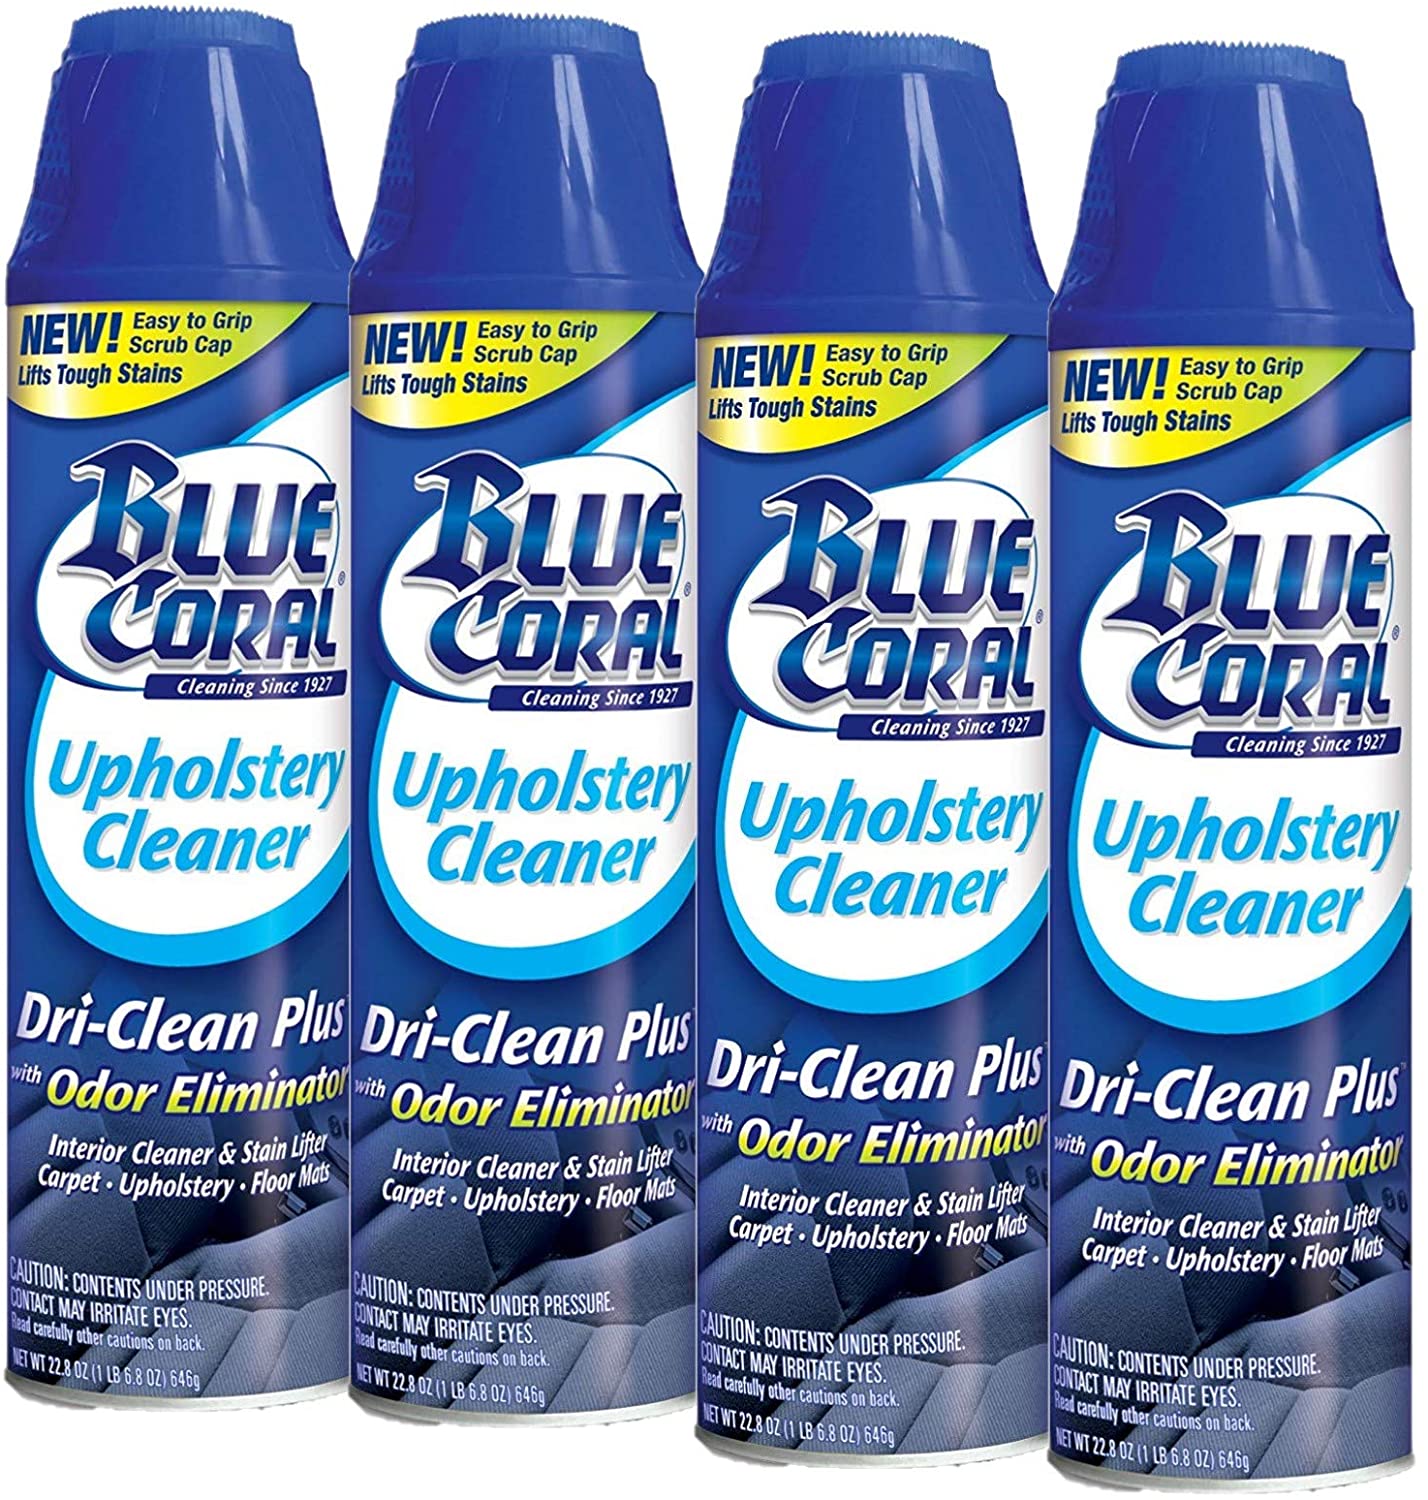 Blue Coral DC22 Upholstery Cleaner Dri-Clean Plus with Odor Eliminator,  22.8 oz. 696230922511